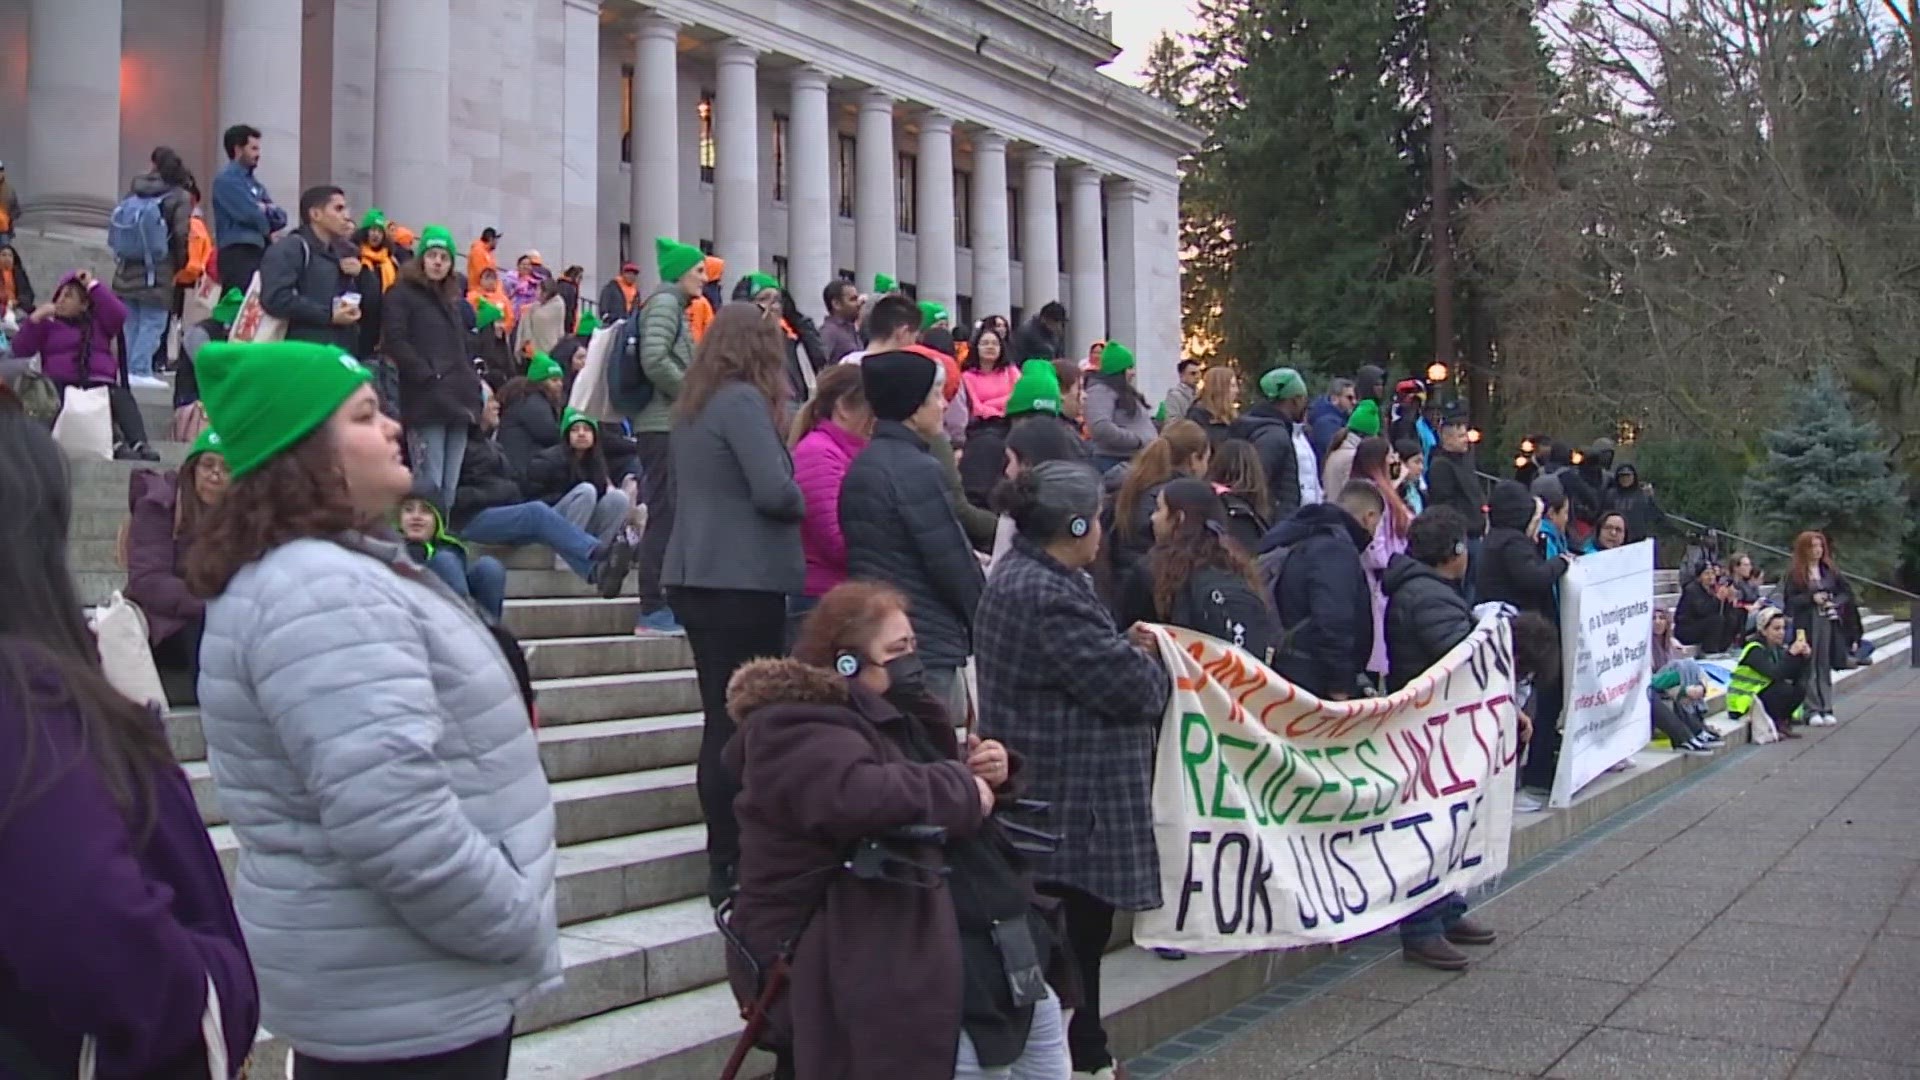 The Washington Immigrant Solidarity Network brought more than 400 people from across the state to the Capitol.